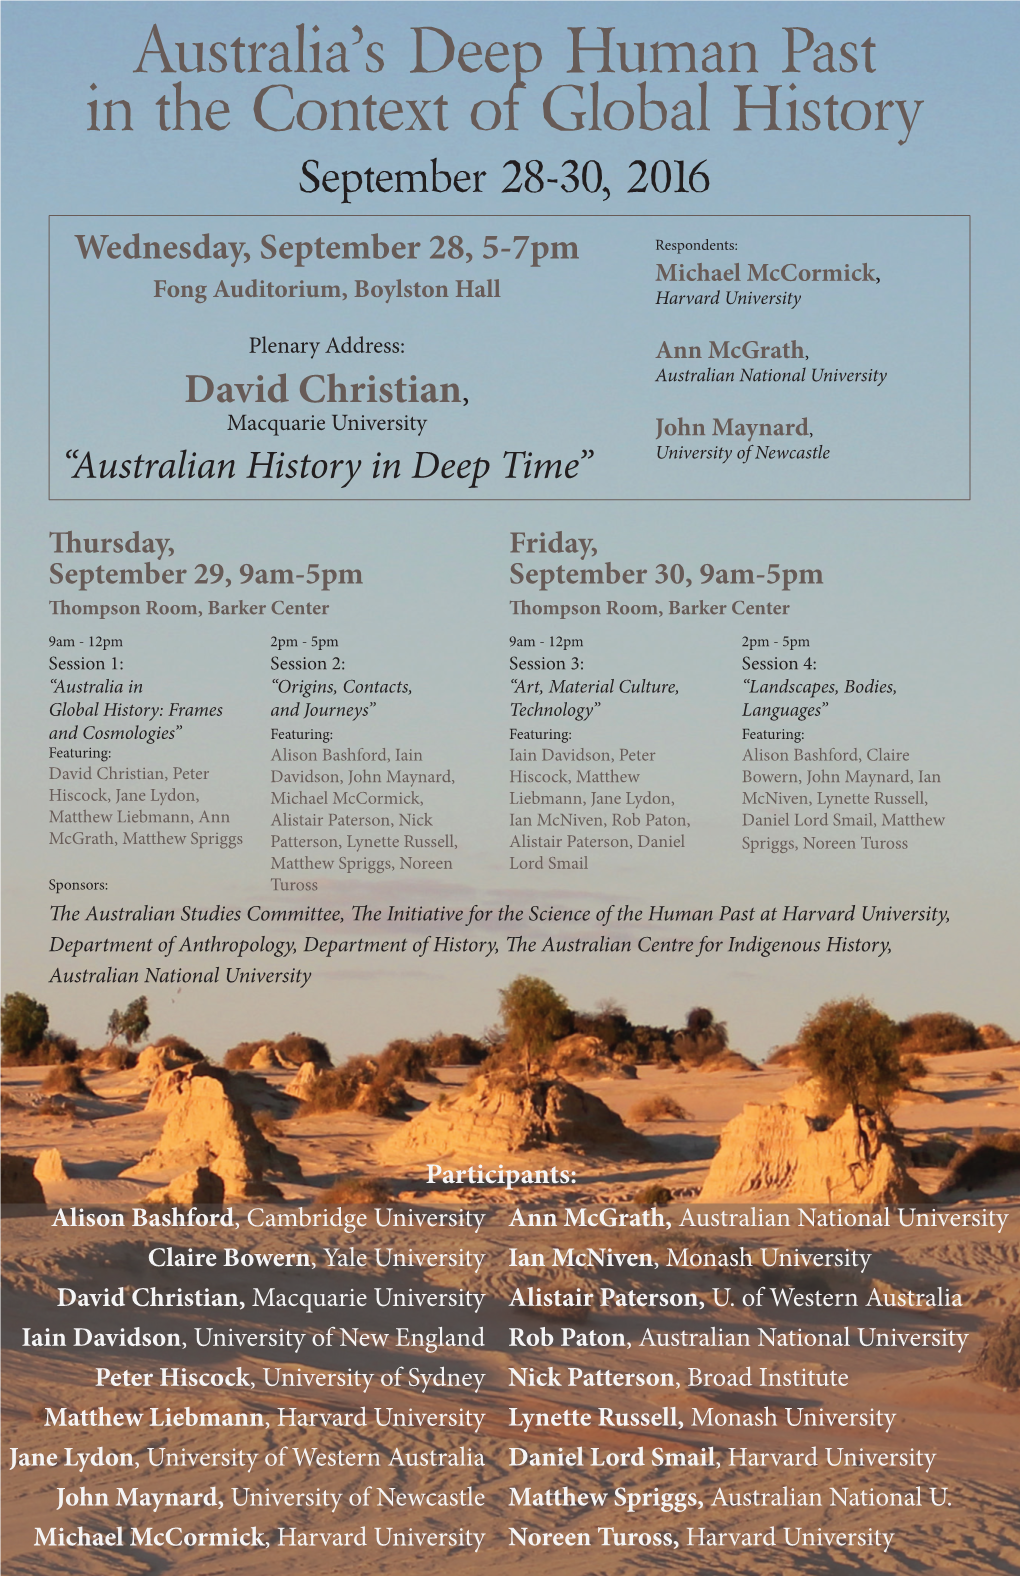 Australia's Deep Human Past in the Context of Global History